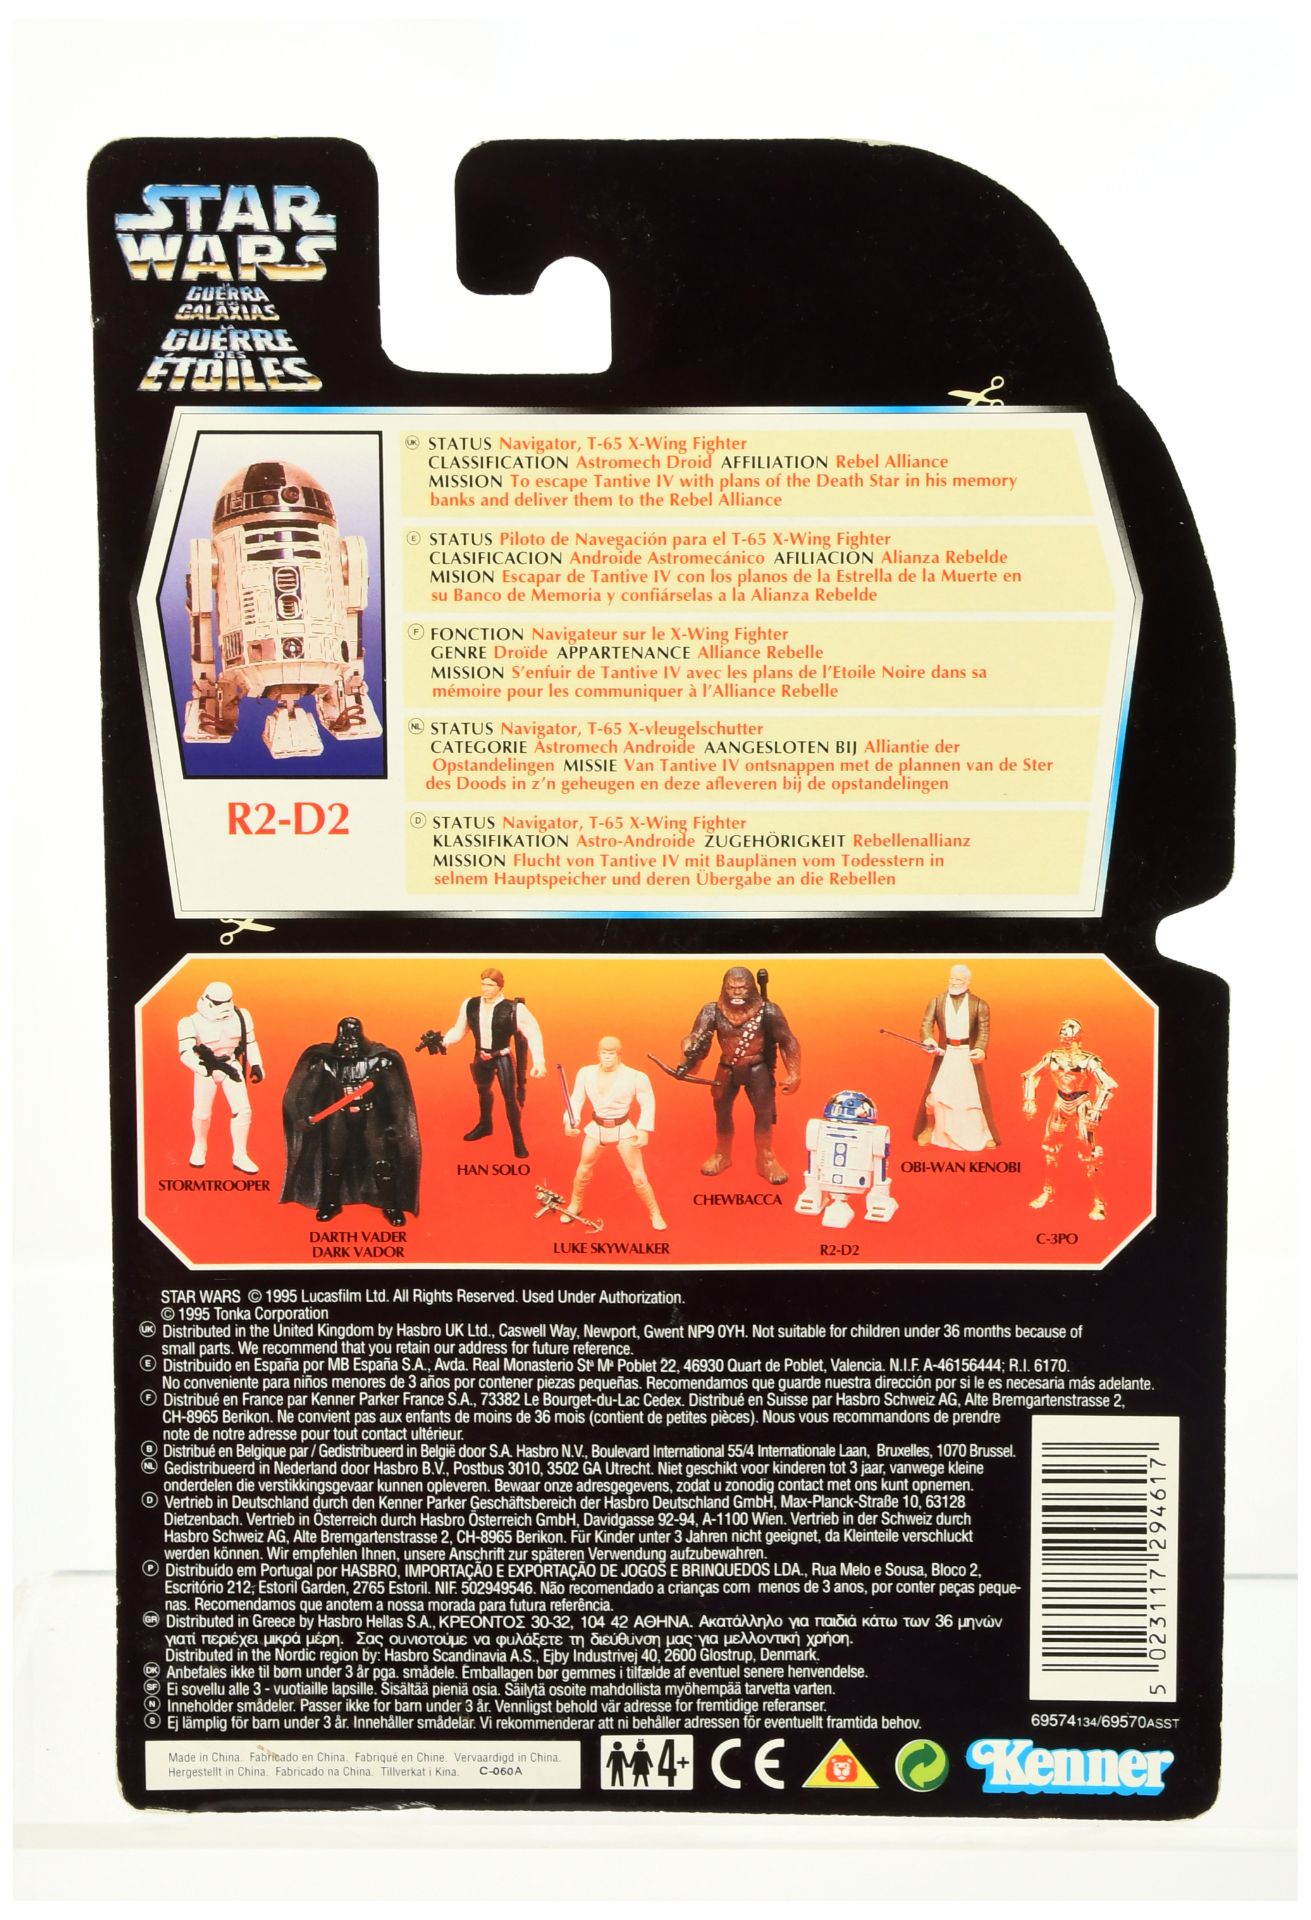 Kenner Star Wars The Power of the Force 2 Orange R2-D2 3 3/4" signed figure - Image 2 of 4